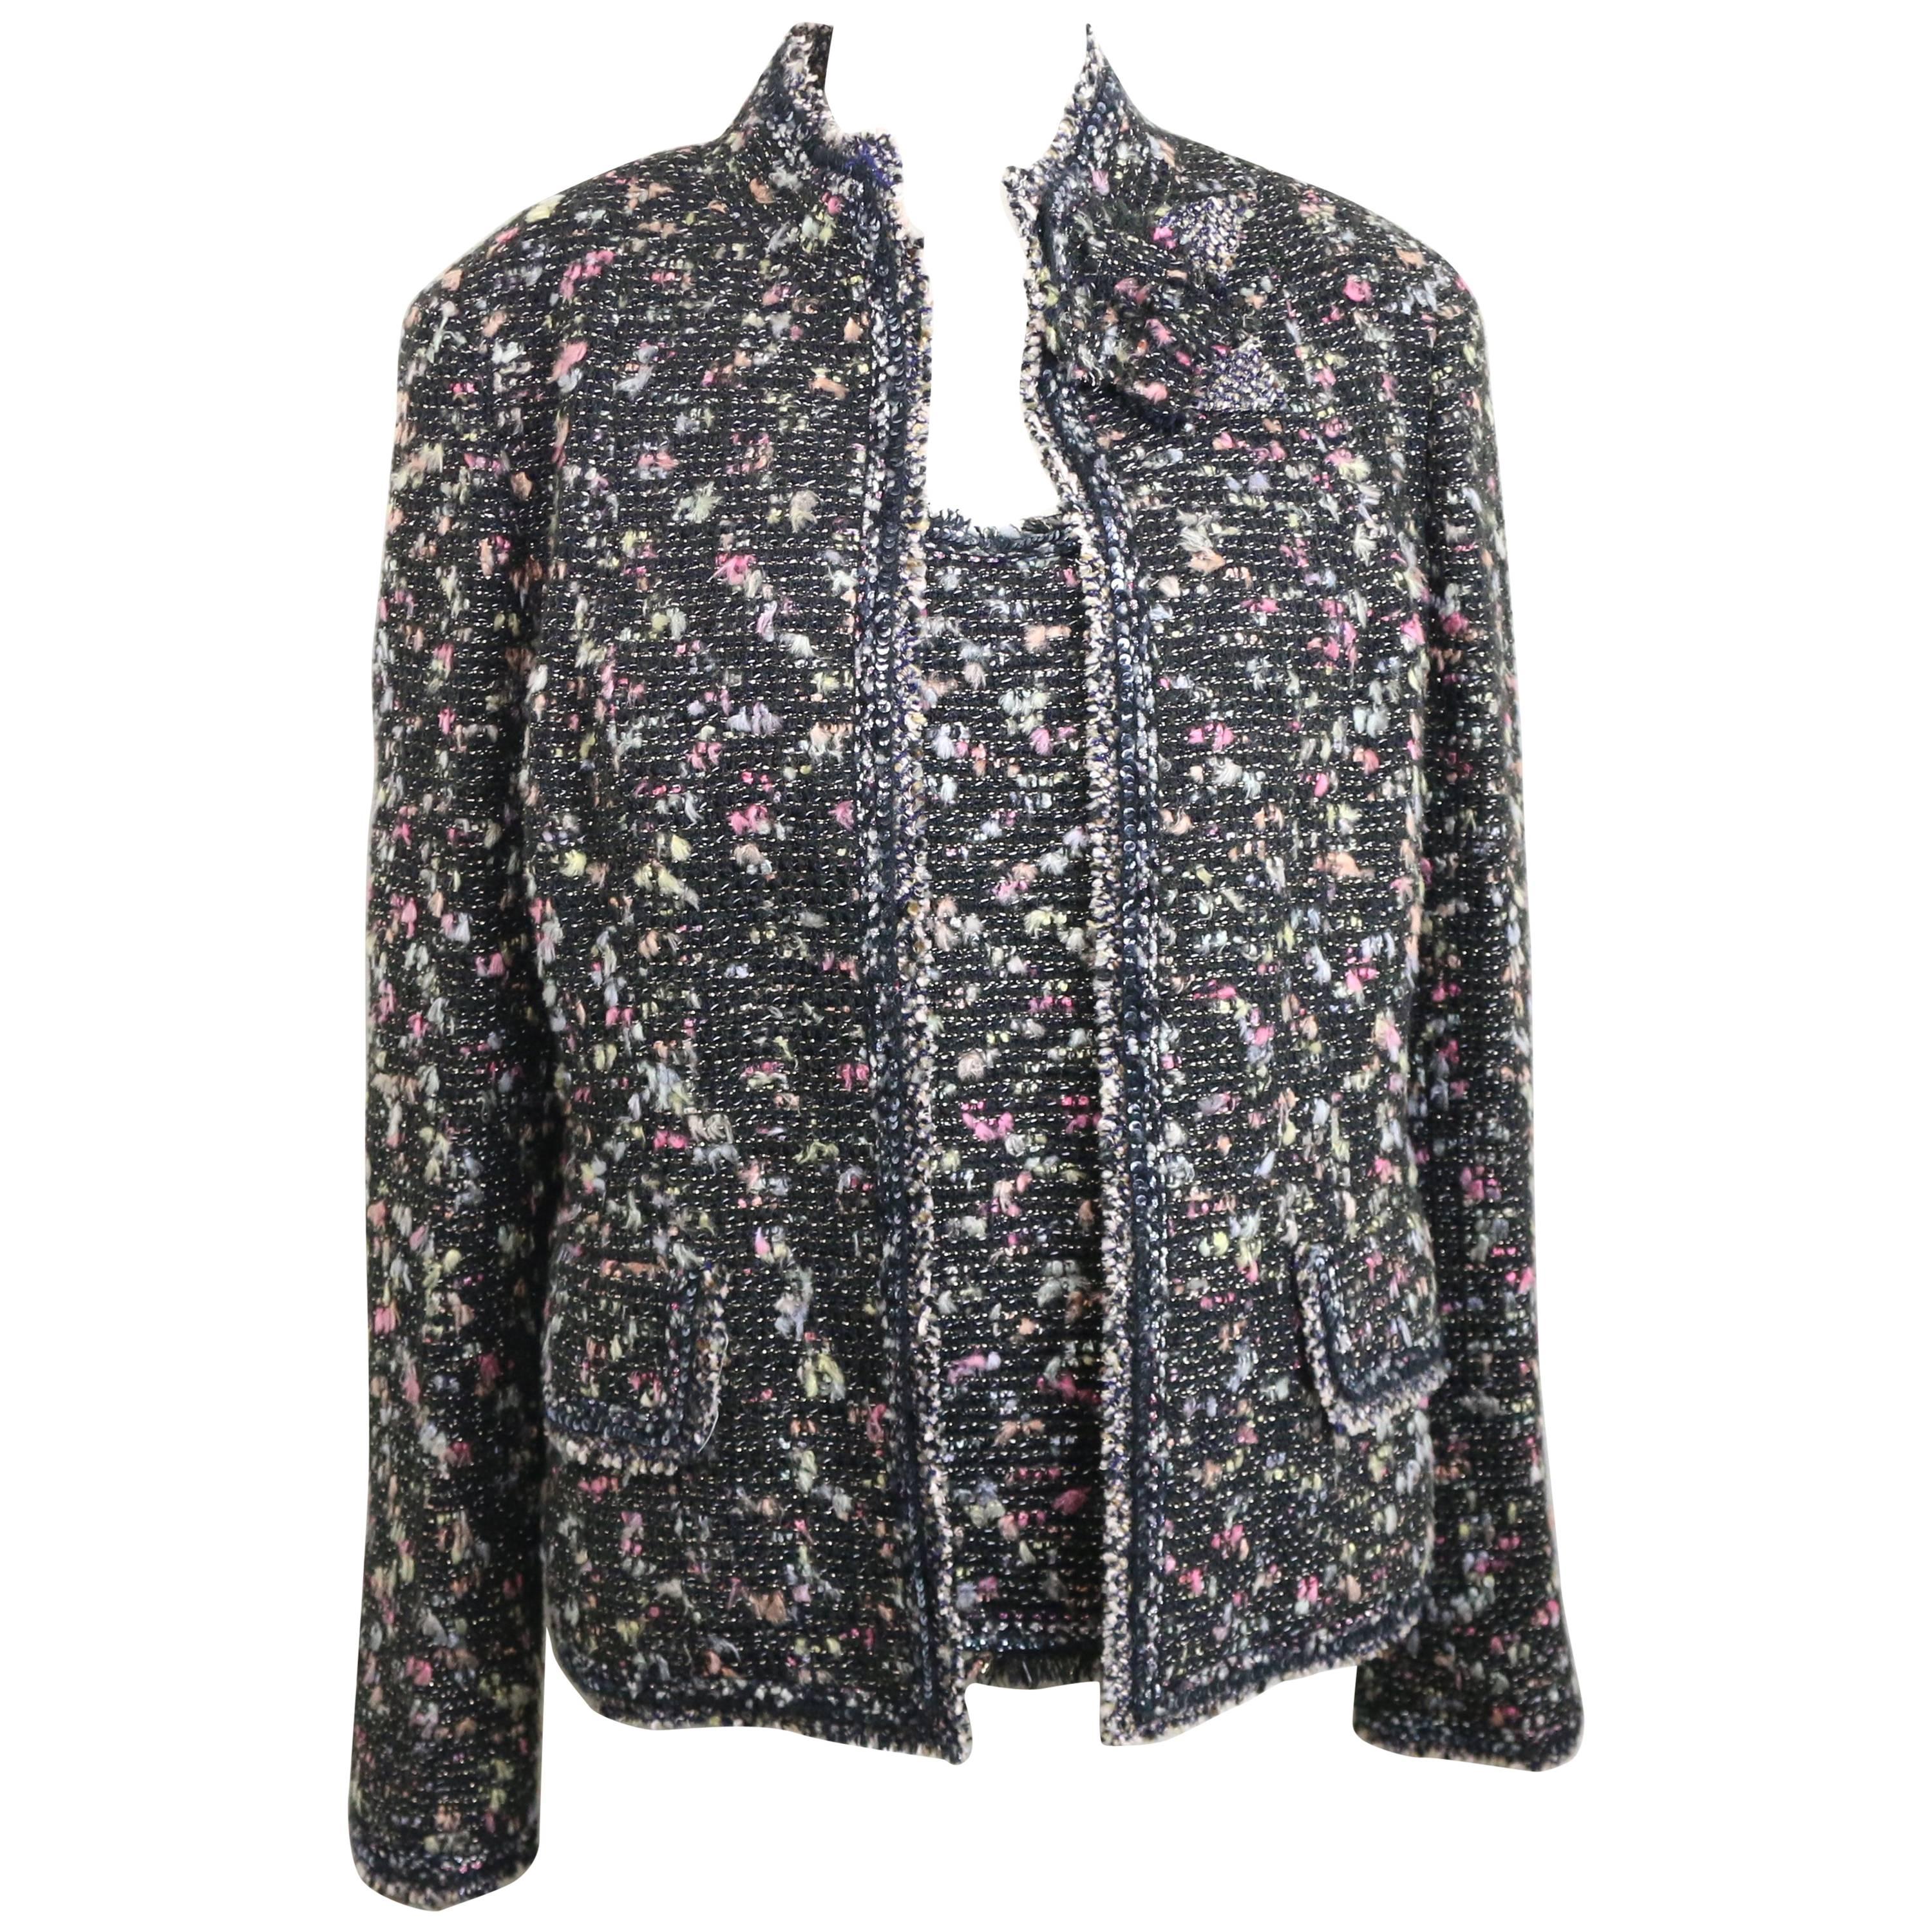 Chanel Black Multi Colours Tweed Jacket and Sleeveless Top Ensembles For Sale